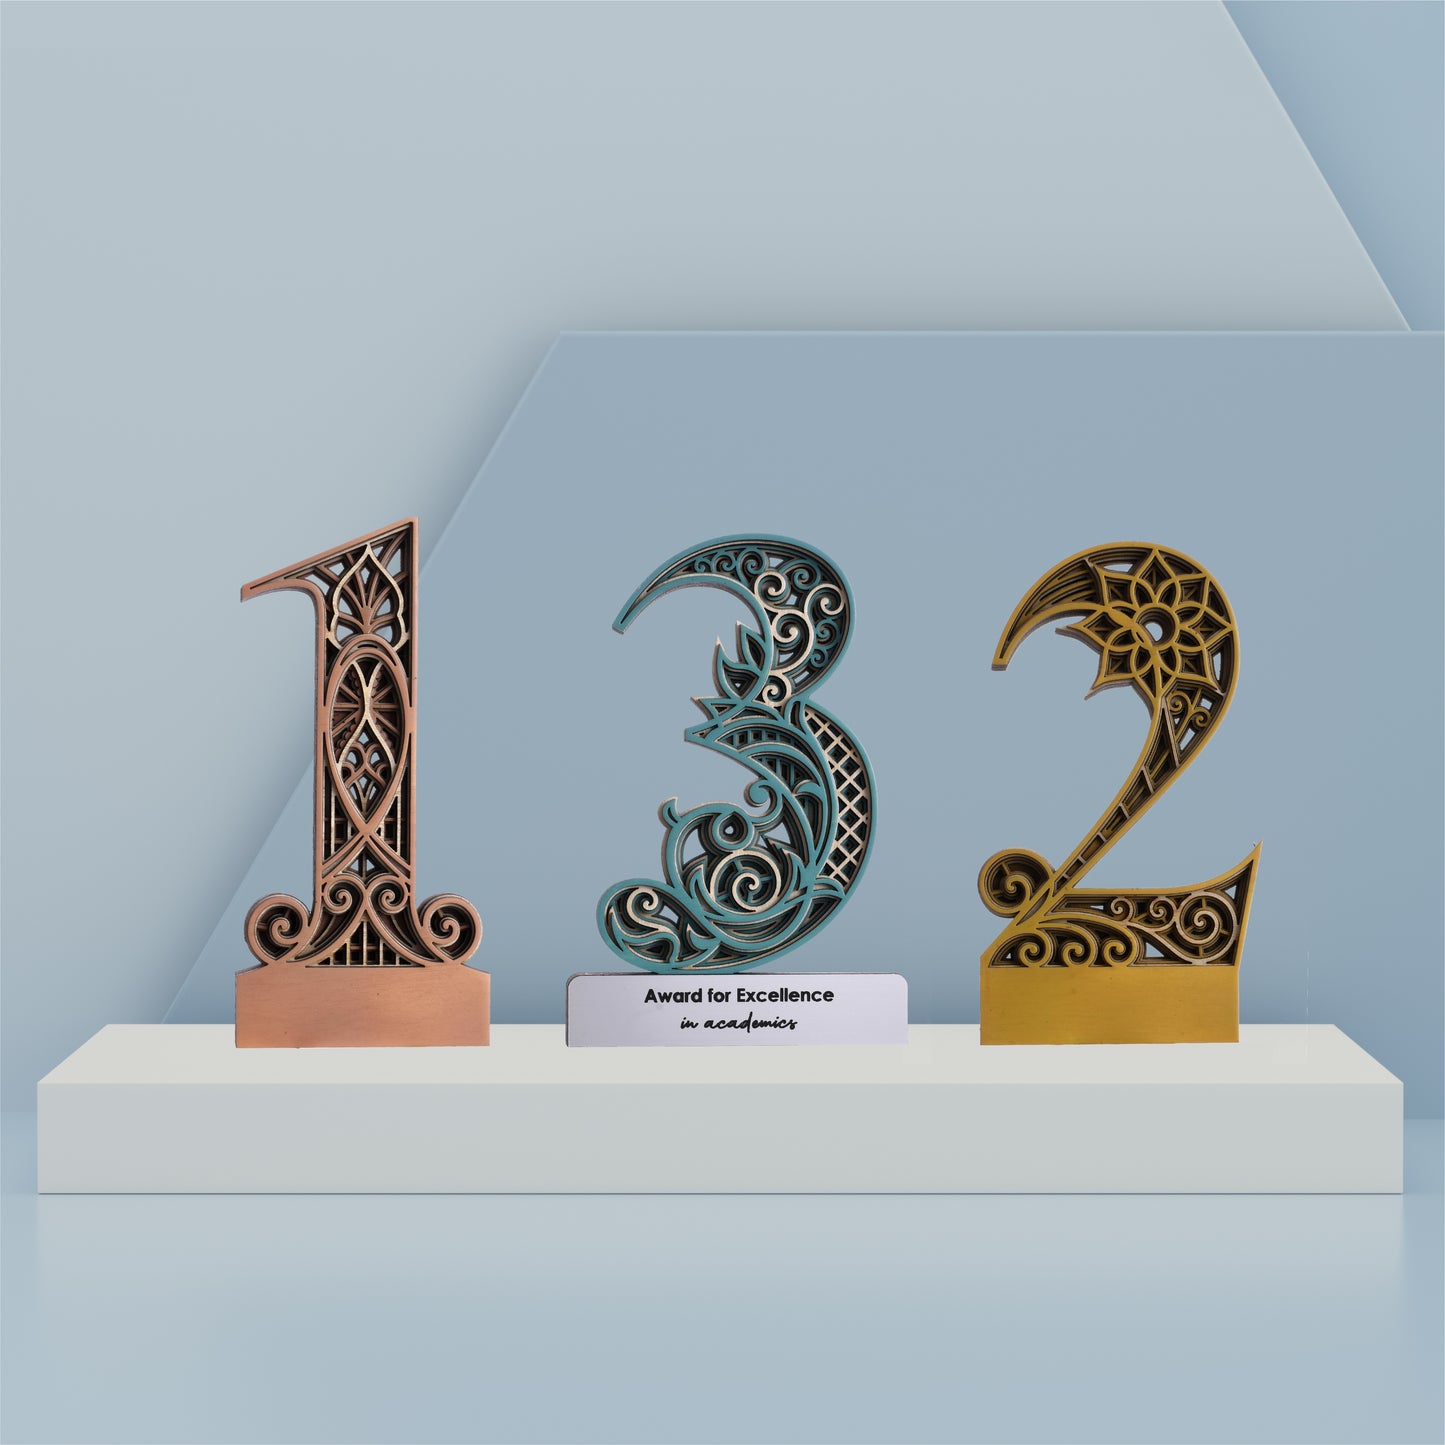 Floral Fantasy: The Artistic Wooden Trophy Embodying Achievement and Elegance